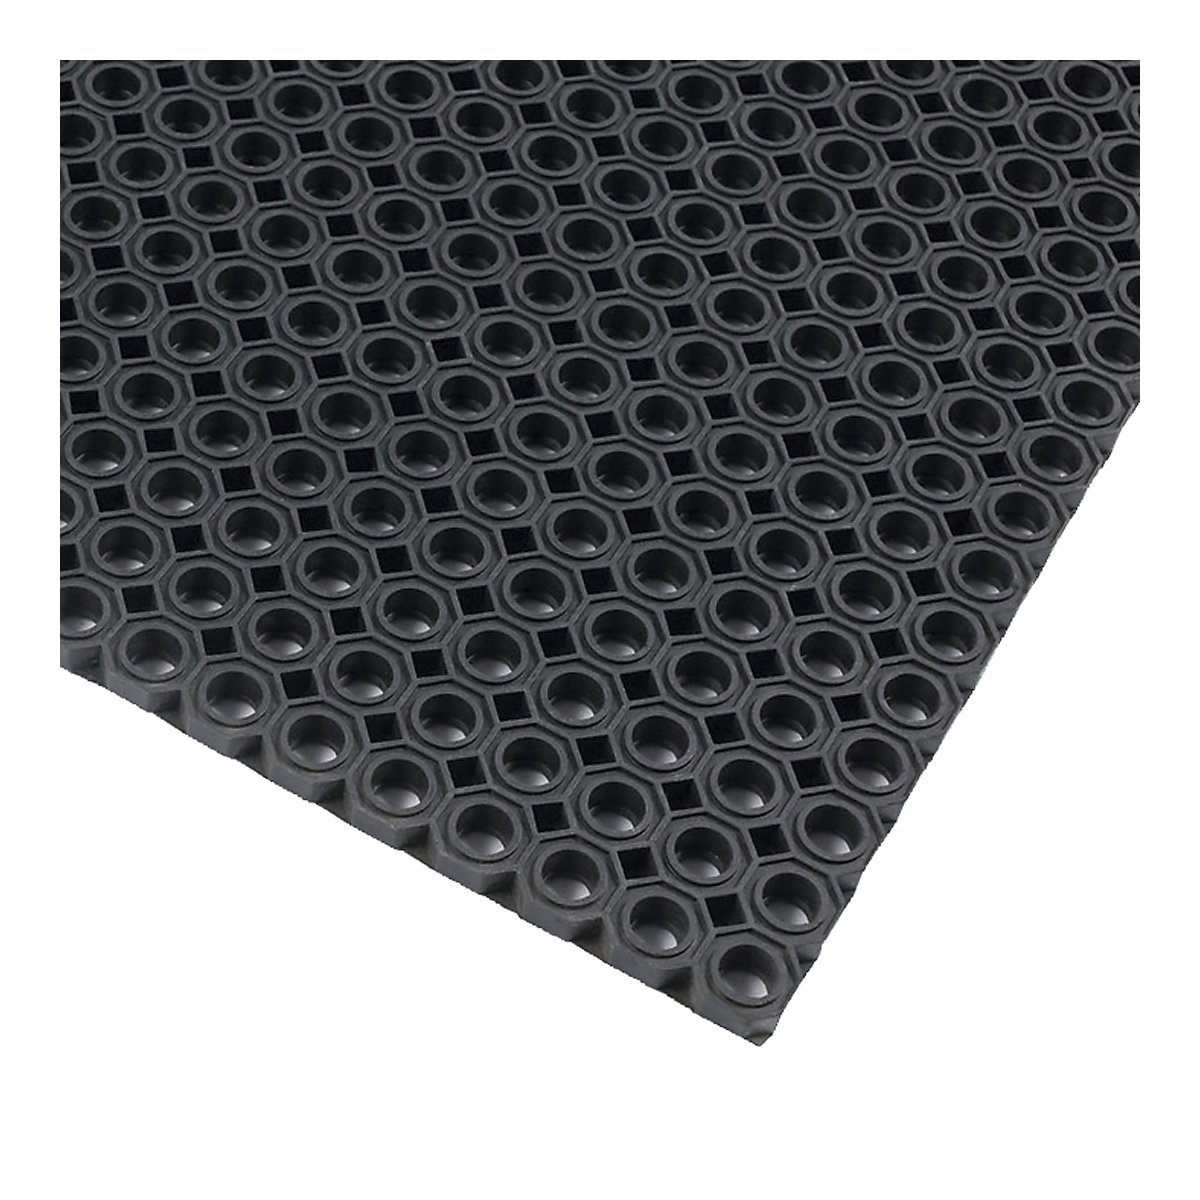 Entrance matting, perforated – NOTRAX